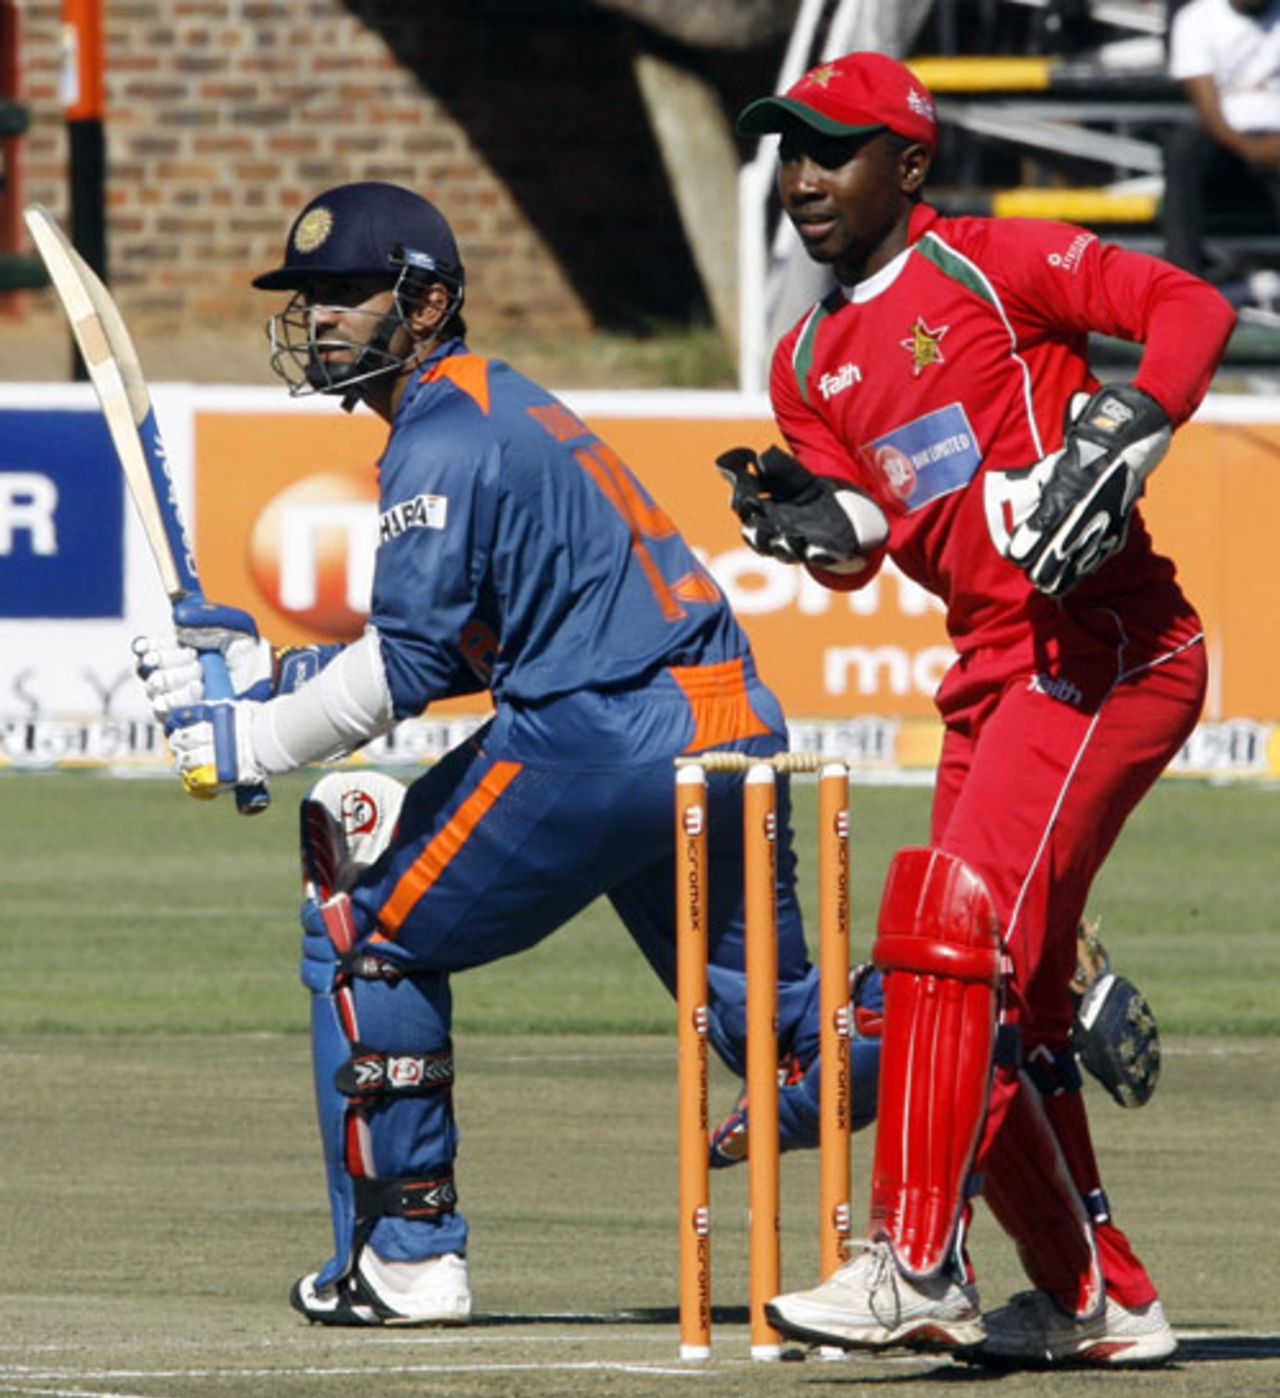 Dinesh Karthik shared an opening stand of 58 with M Vijay, India v Zimbabwe, Tri-series, 4th ODI, Harare, June 3, 2010